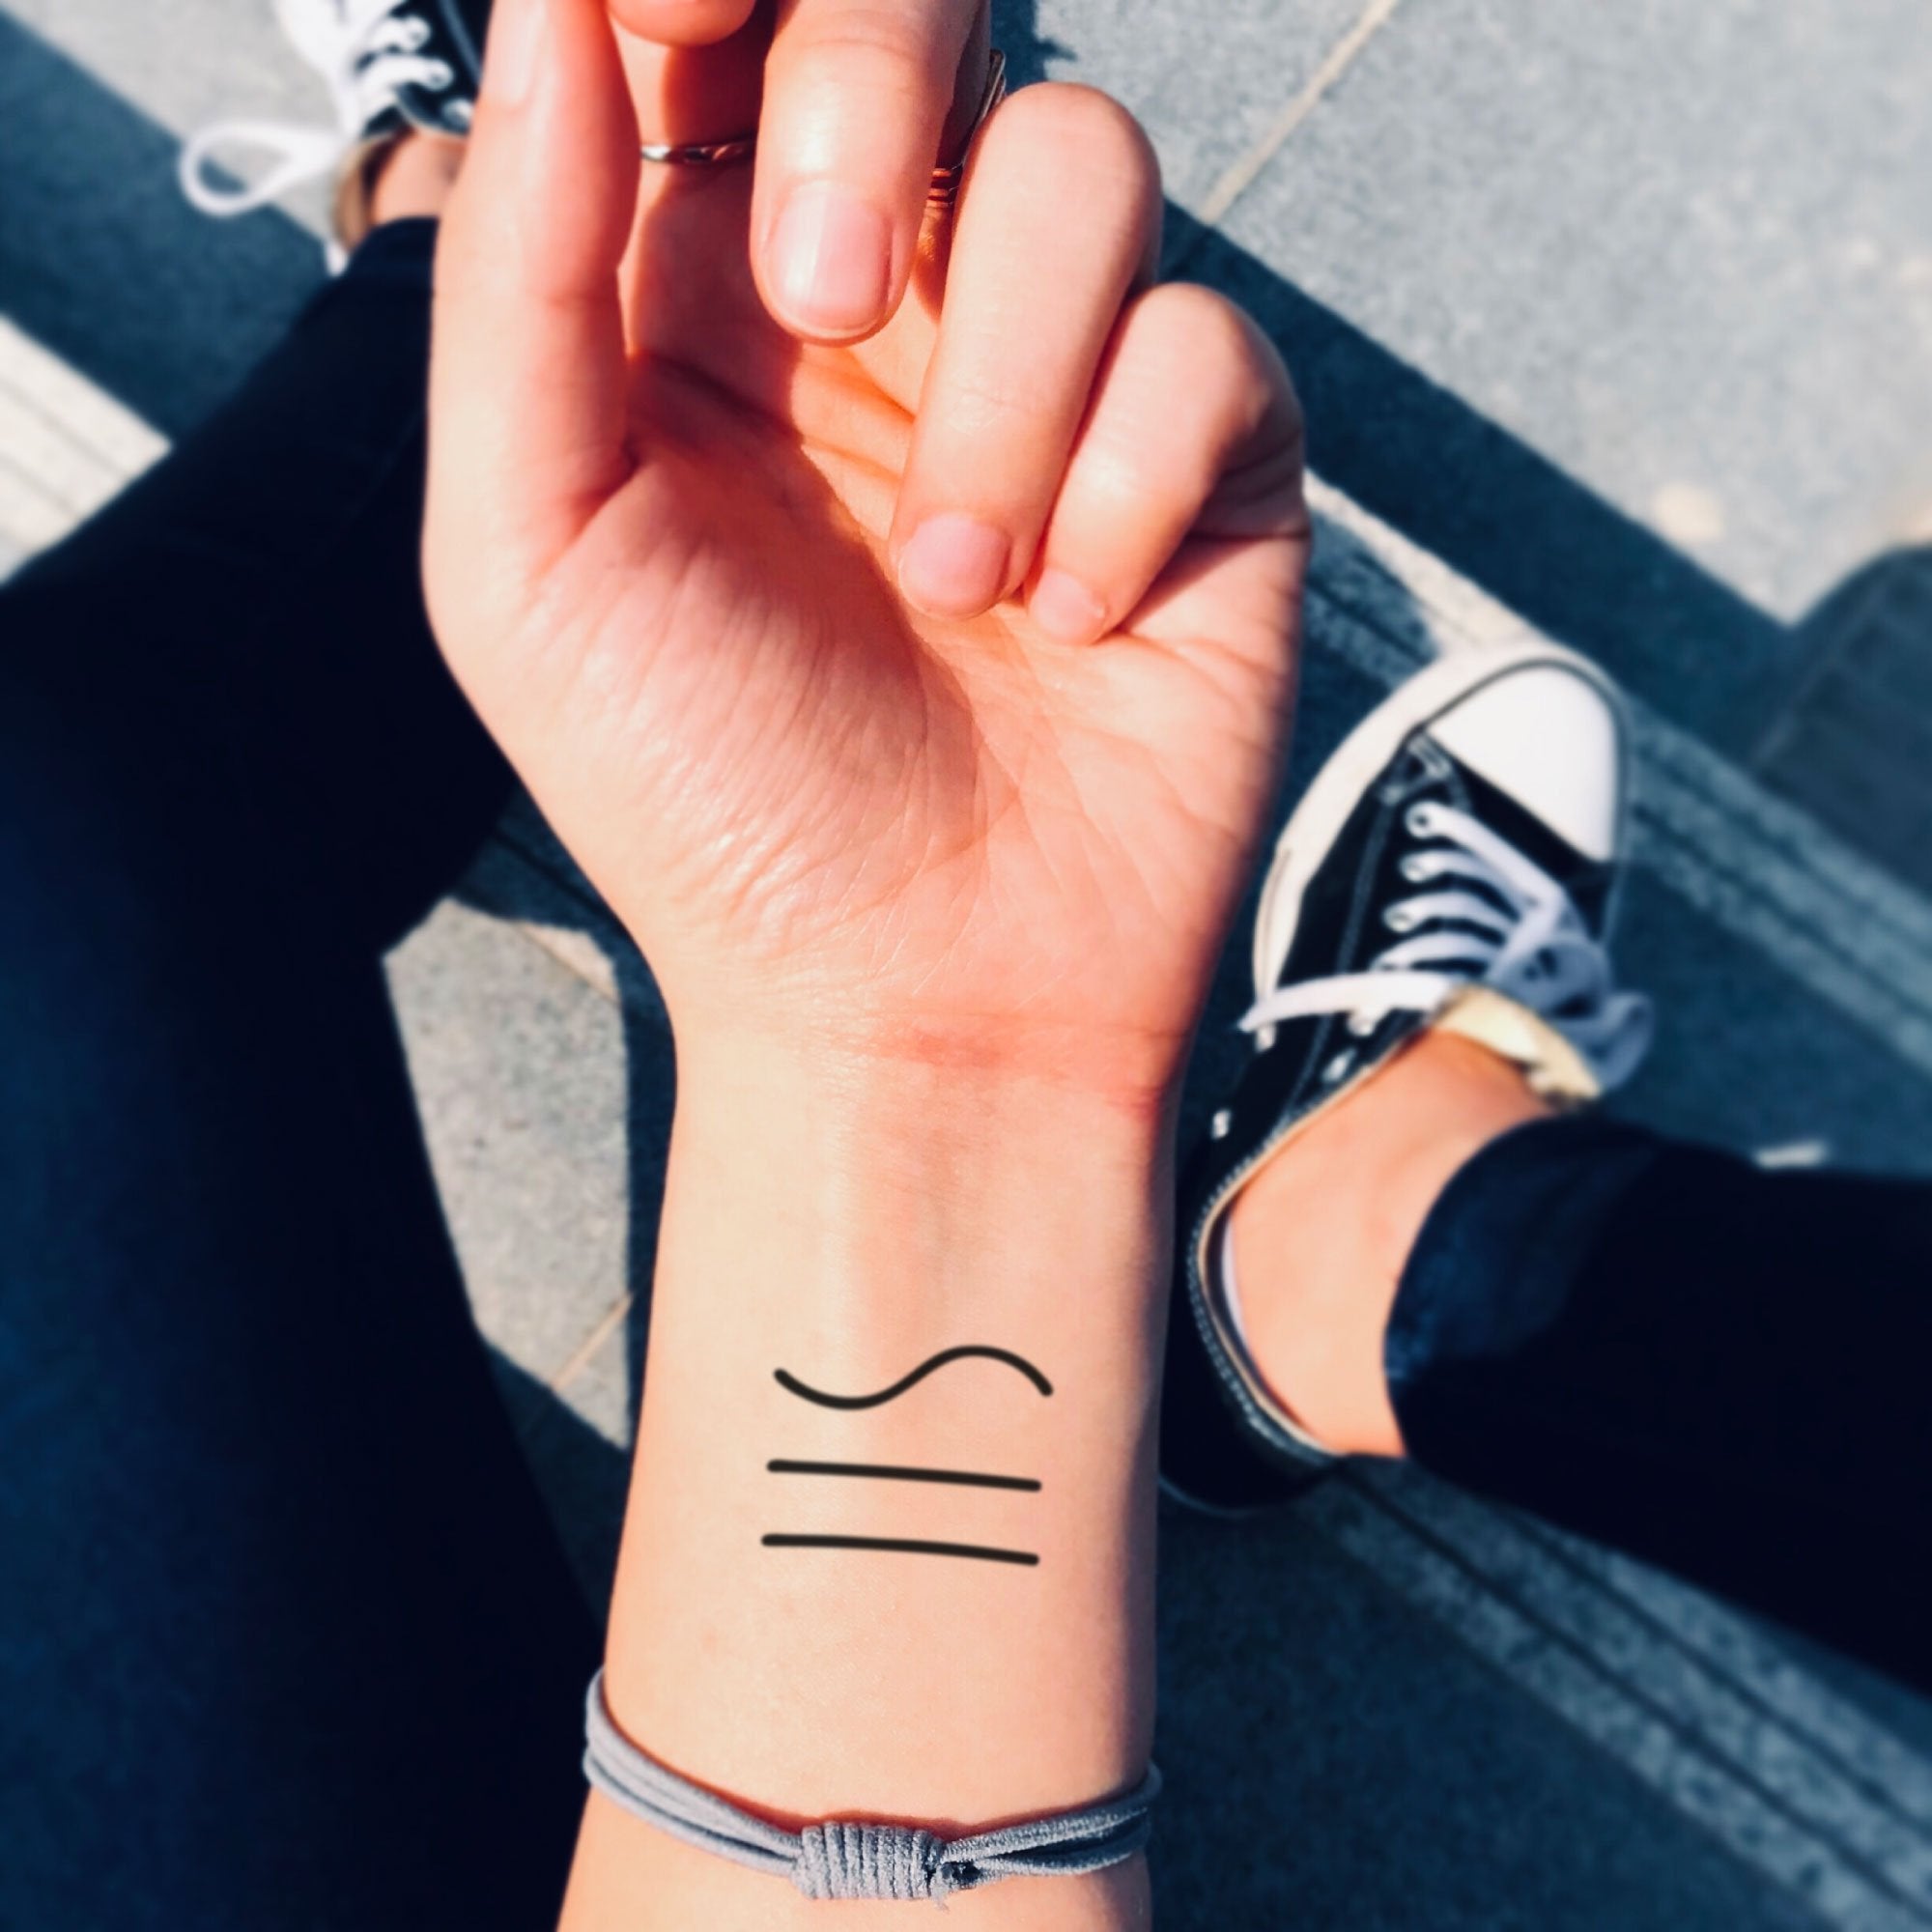 Tattoo tagged with: small, best friend, matching, tiny, disney, love,  ifttt, little, wrist, minimalist, ami, film and book, peter pan, matching  tattoos for best friends | inked-app.com